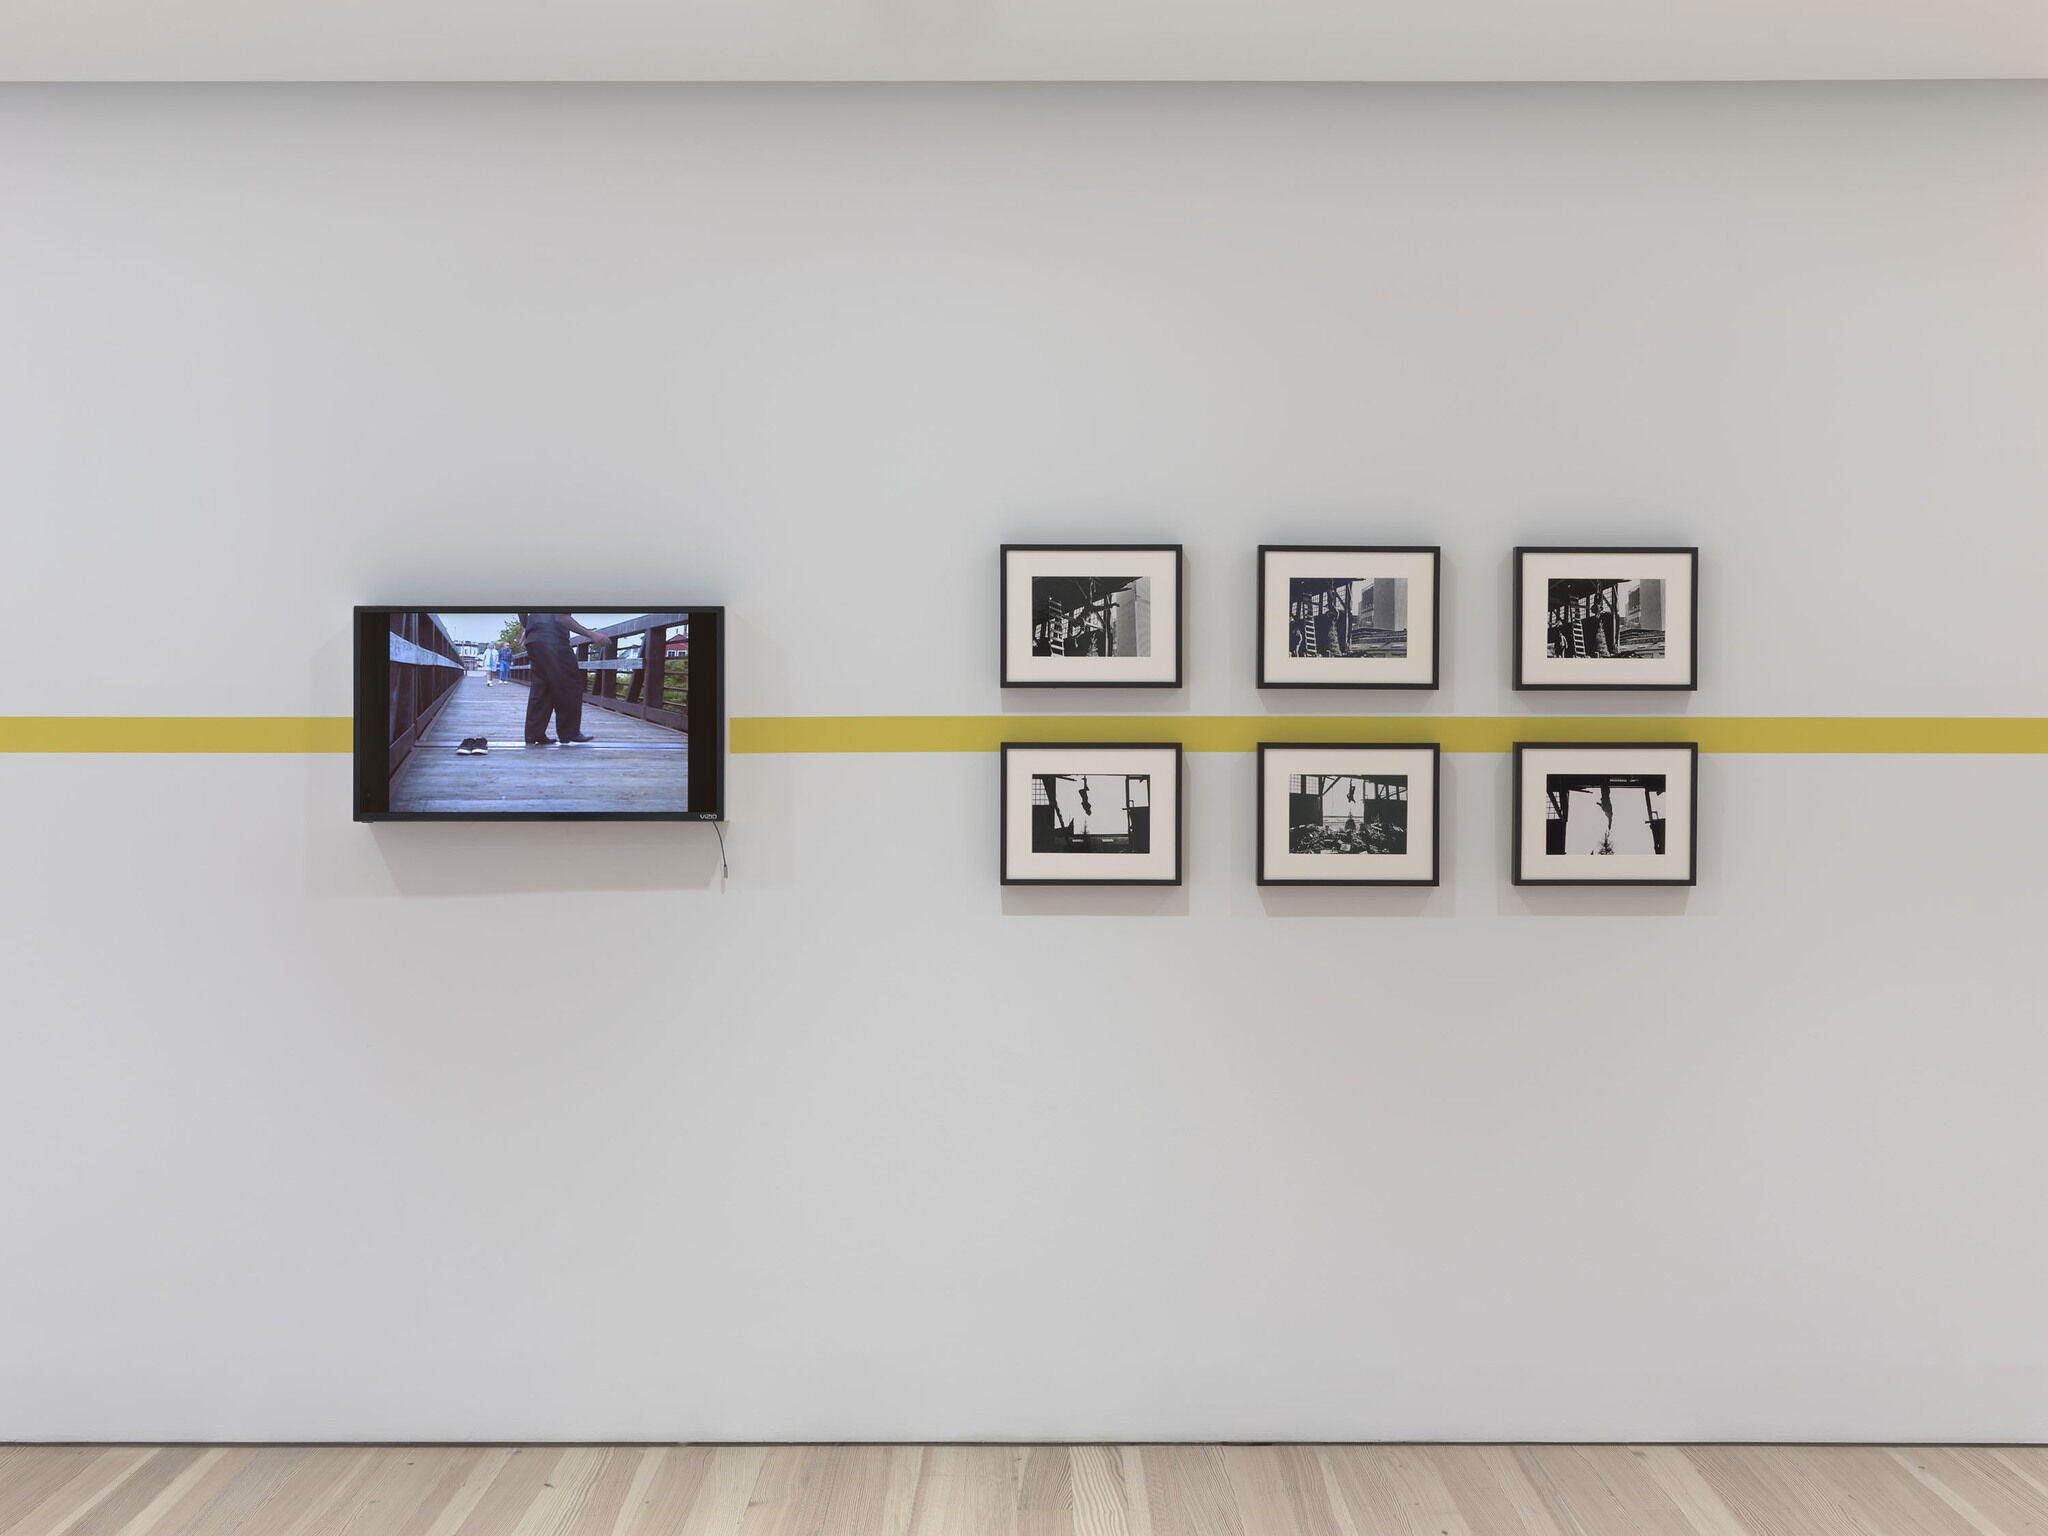 A black screen and a series of six framed photographs are mounted against a white exhibition wall.